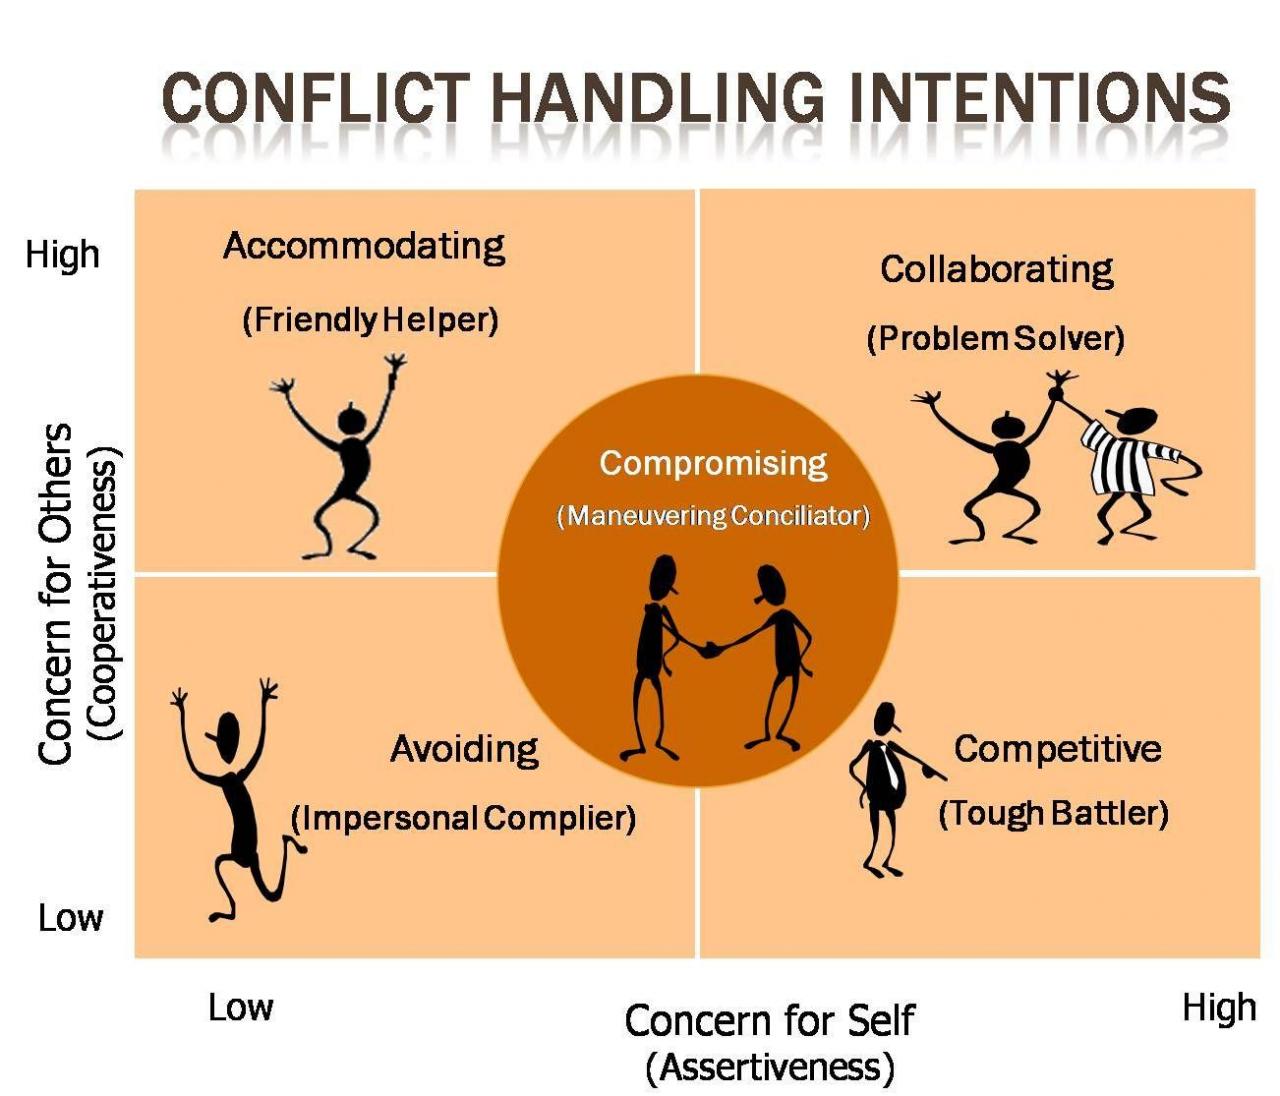 How do you manage conflict in an organization